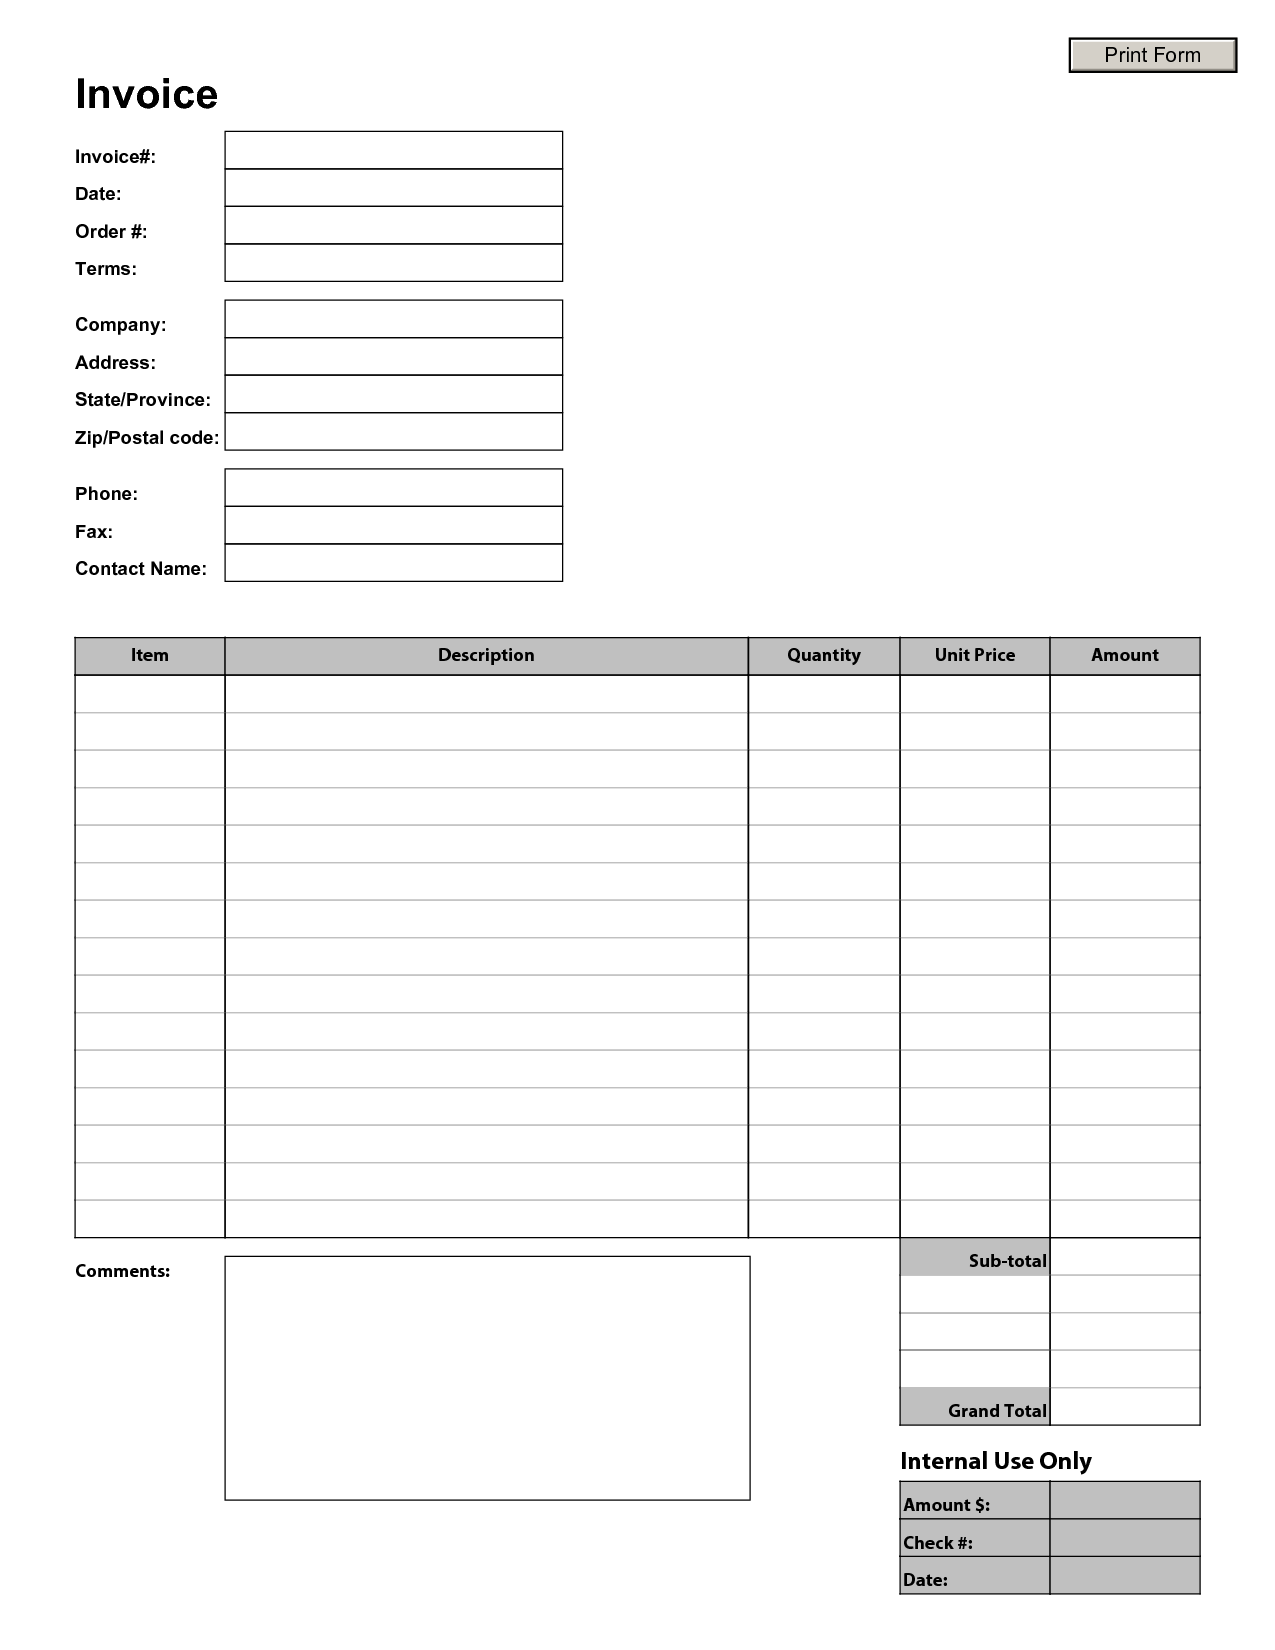 Printable Invoice Template | invoice example